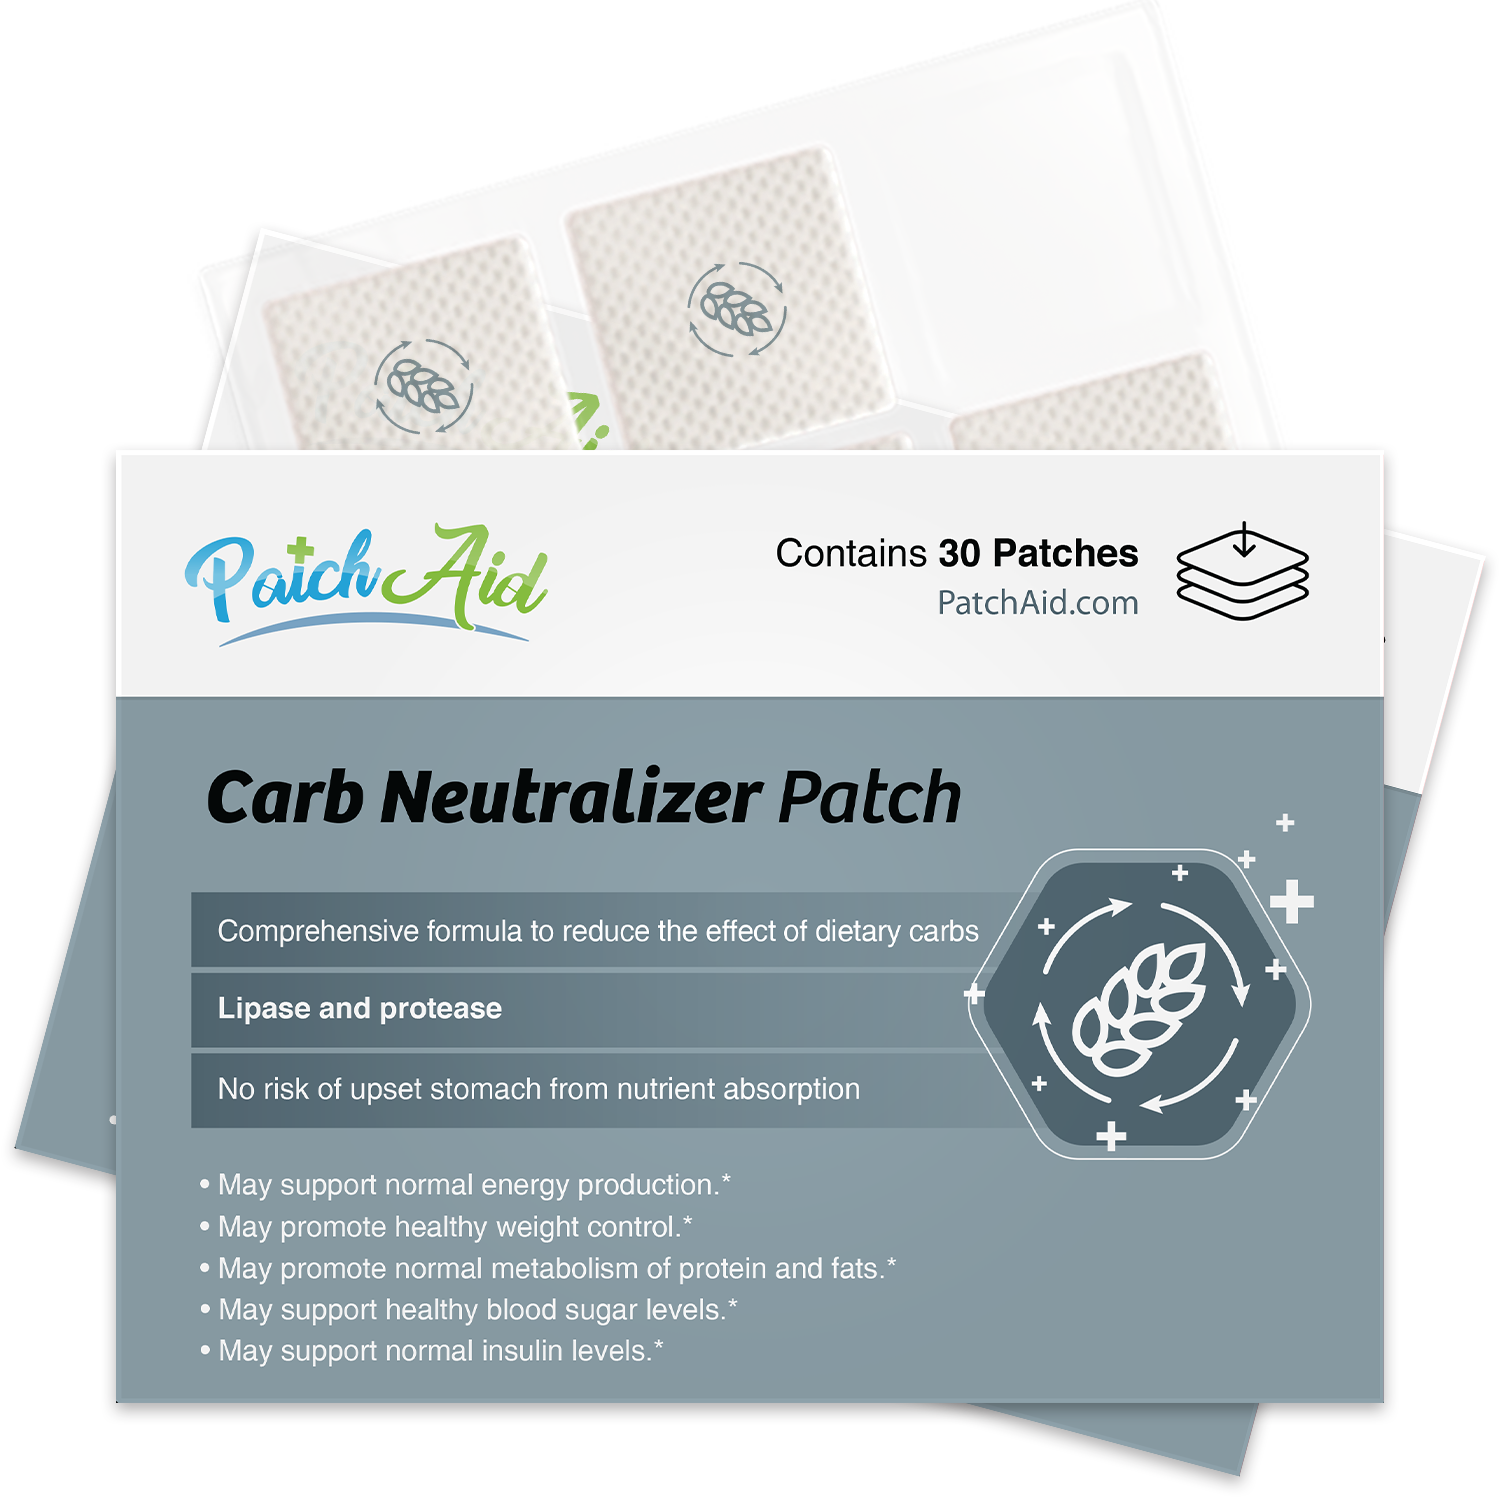 Carb Neutralizer Patch by PatchAid